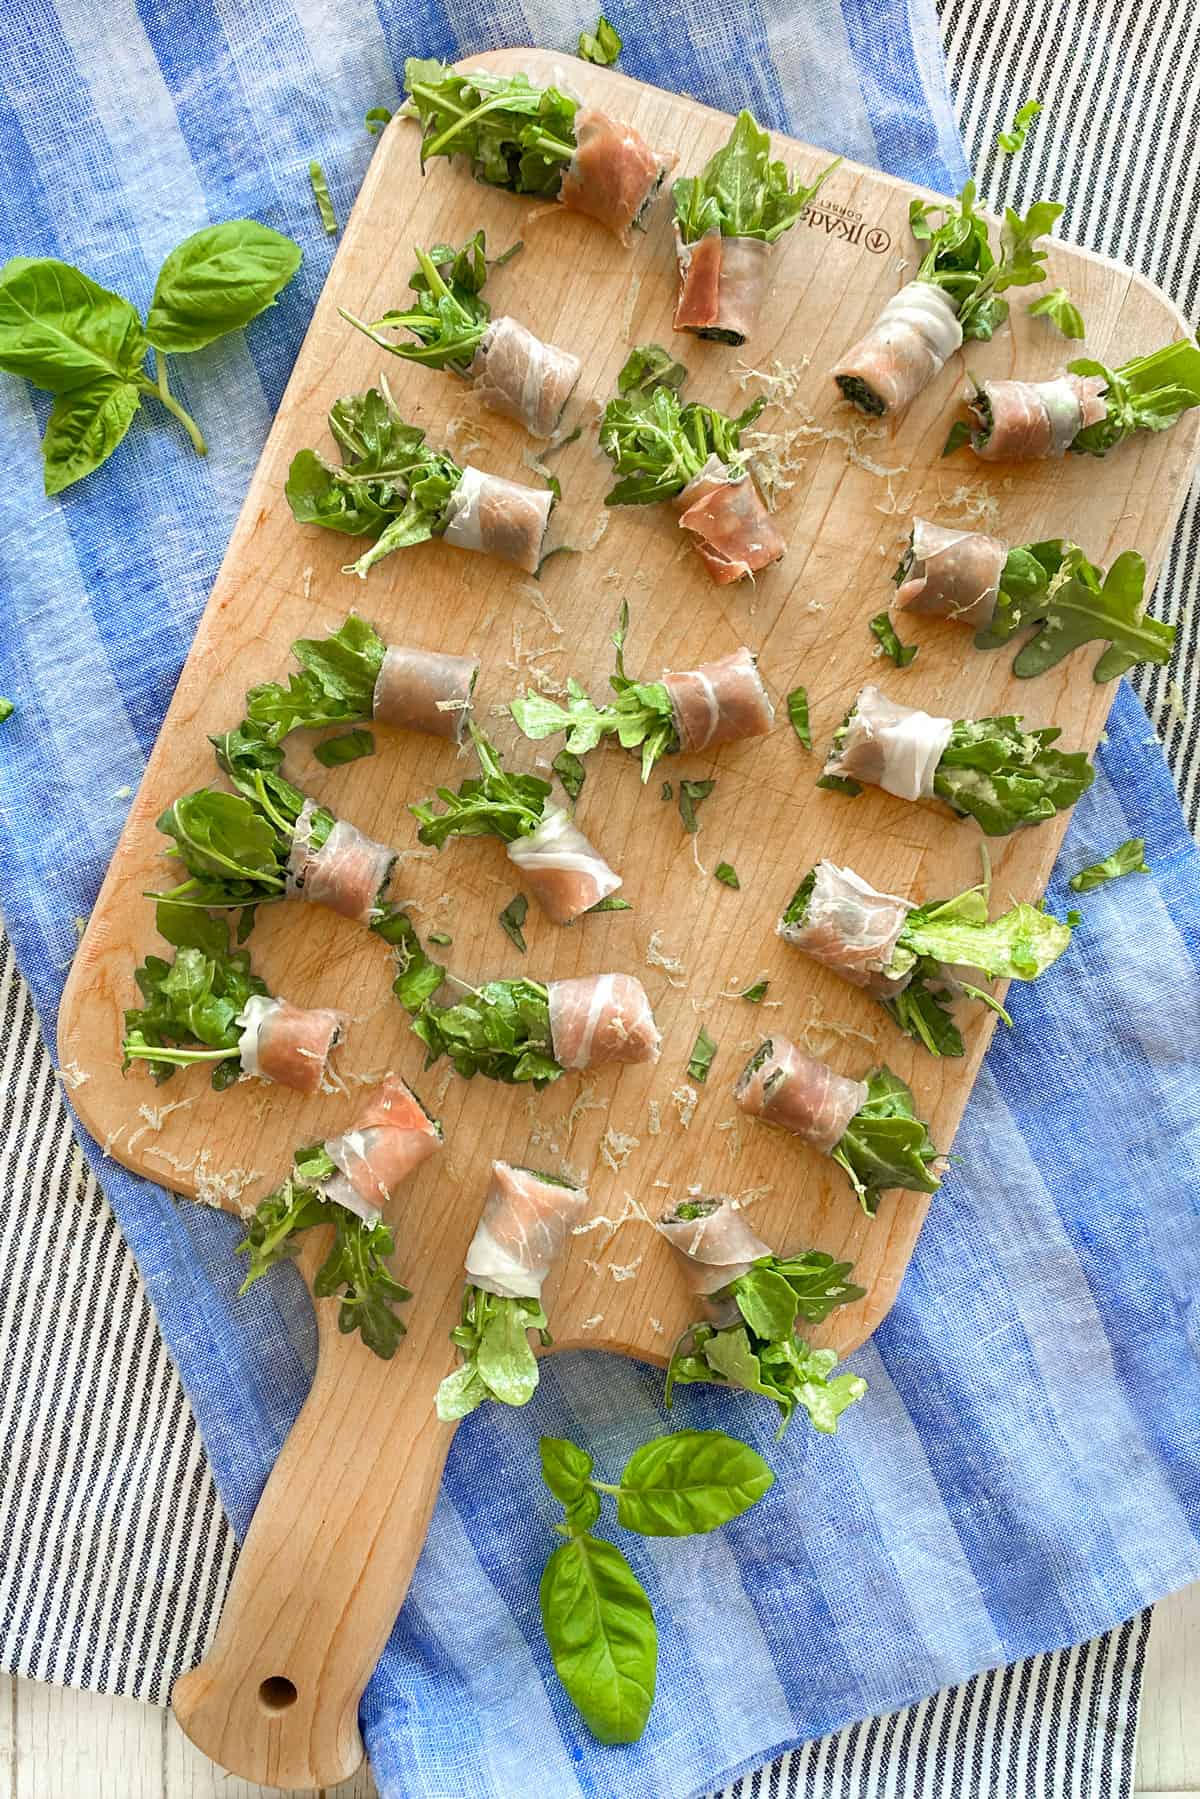 Prosciutto wrapped arugula bundles on a wooden cutting board, seen from above